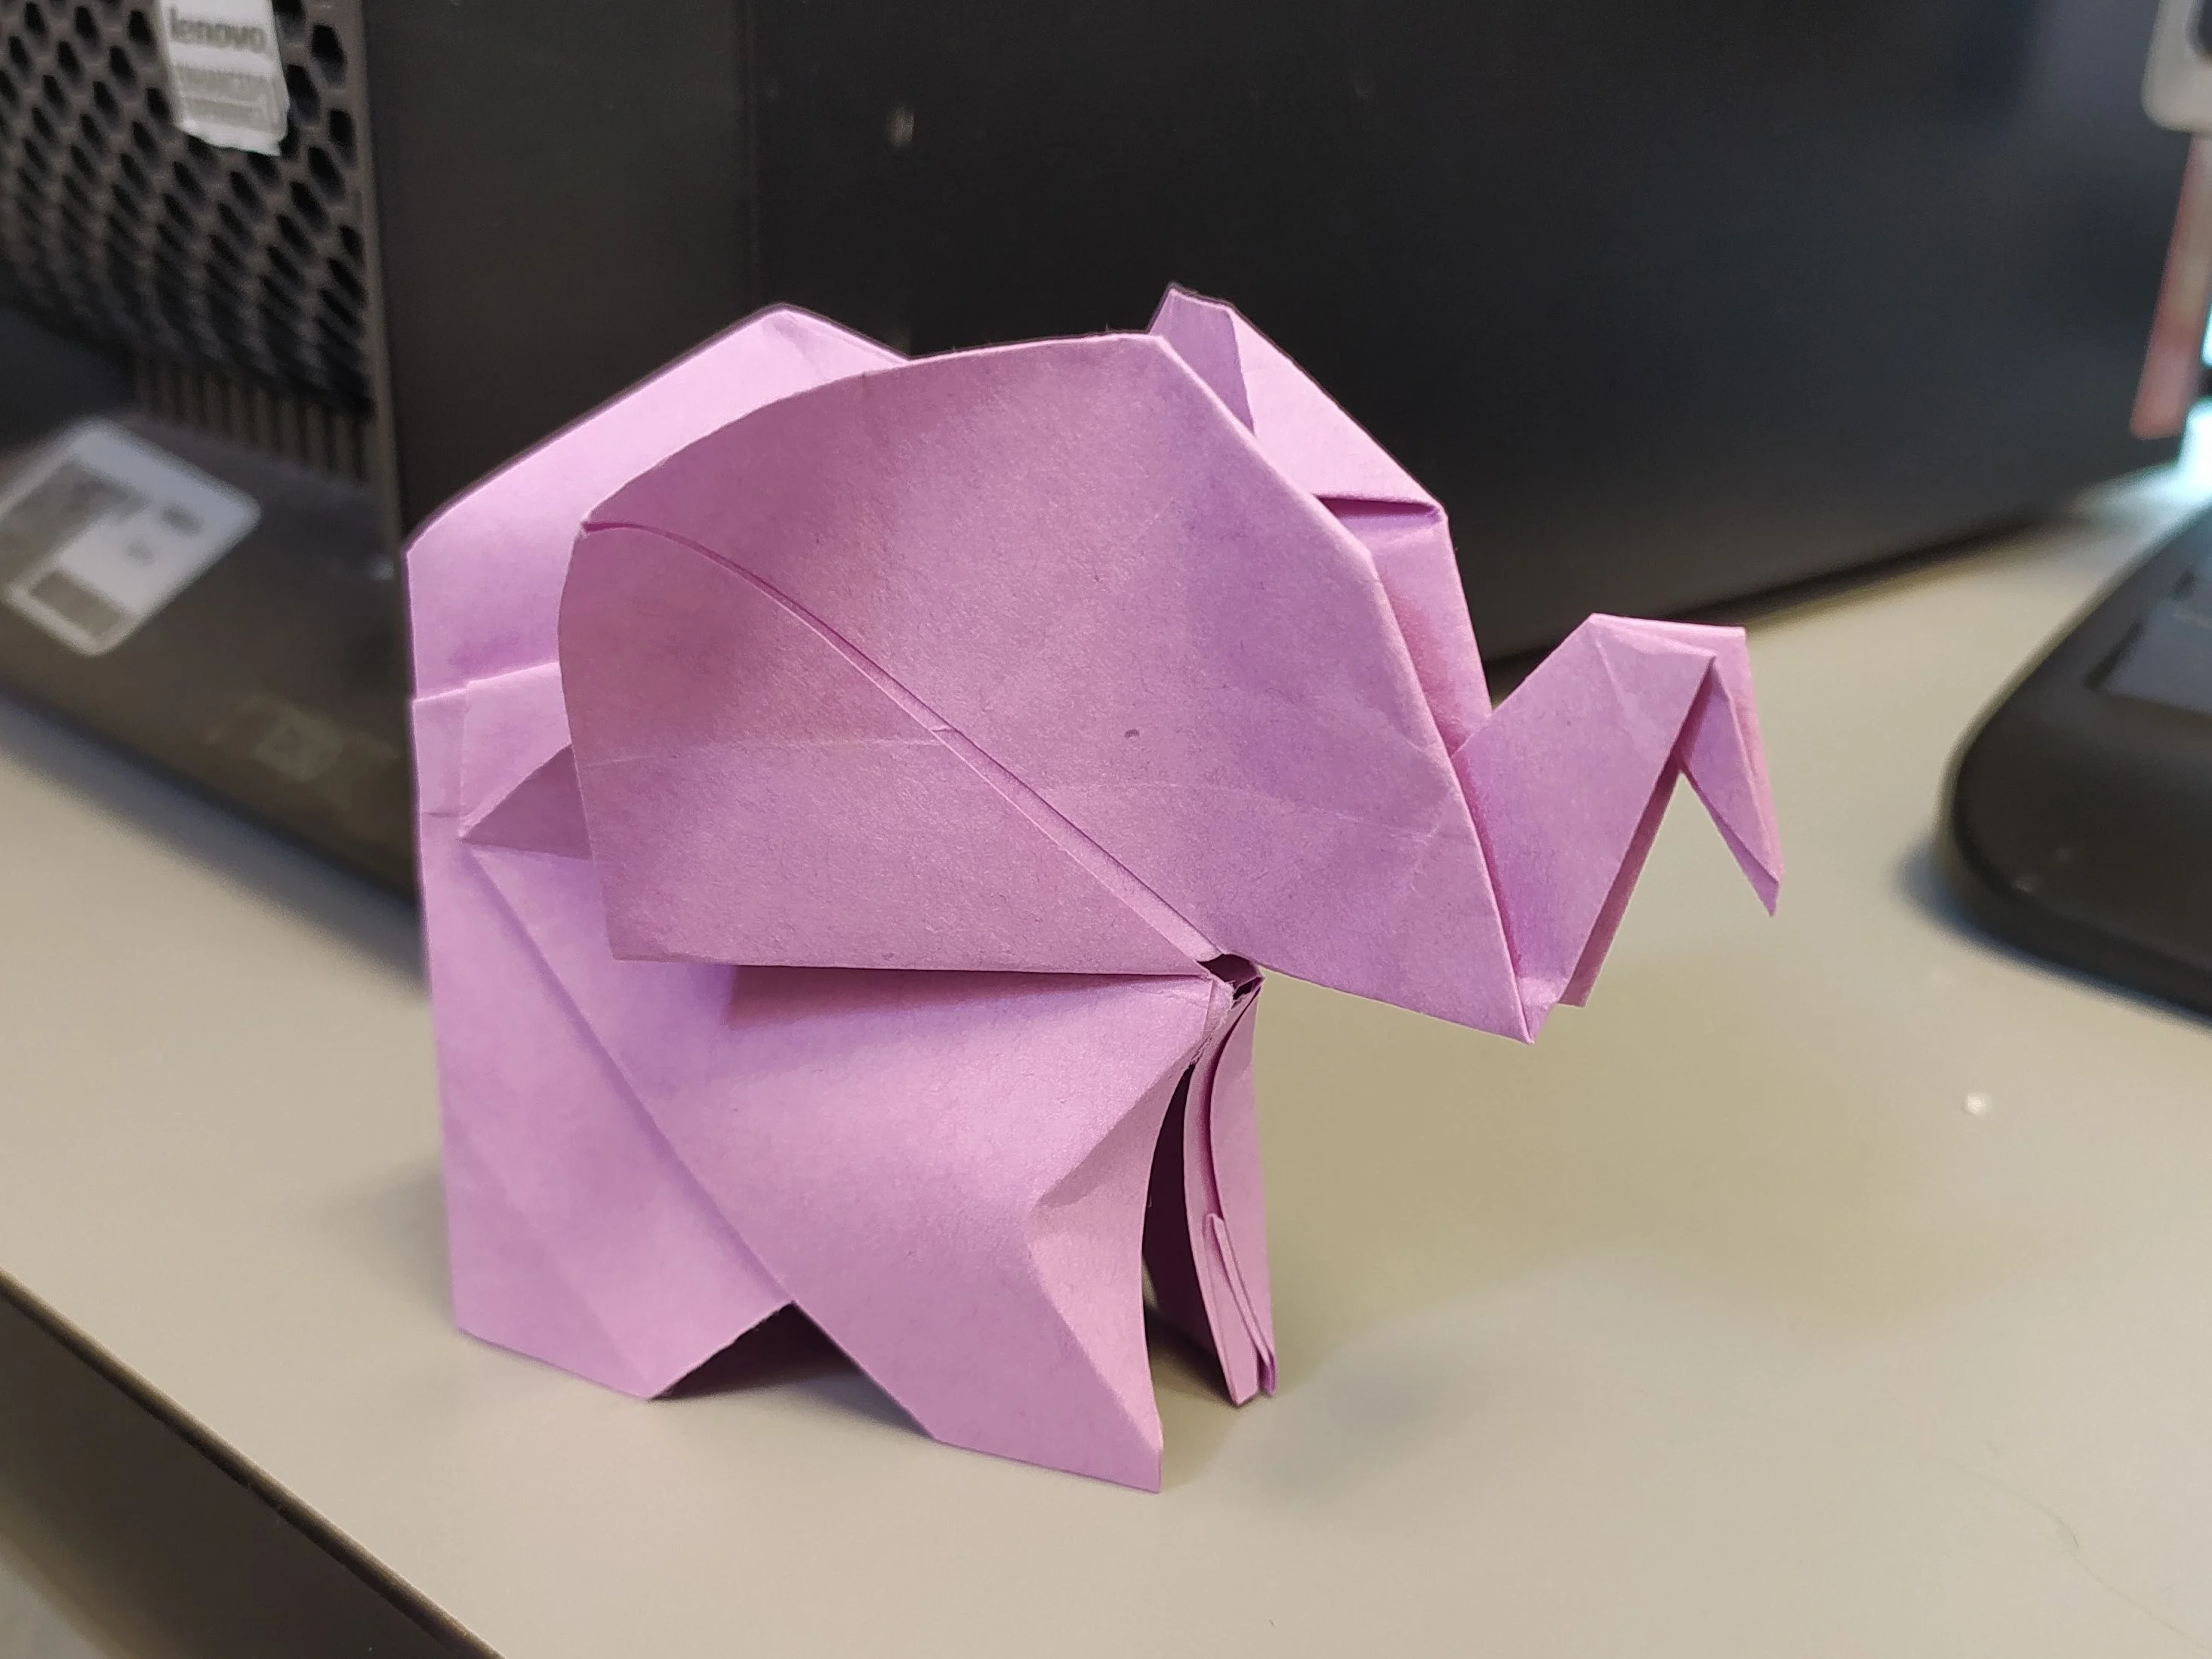  A super cute elephant which looks minimal, simple and elegant. 